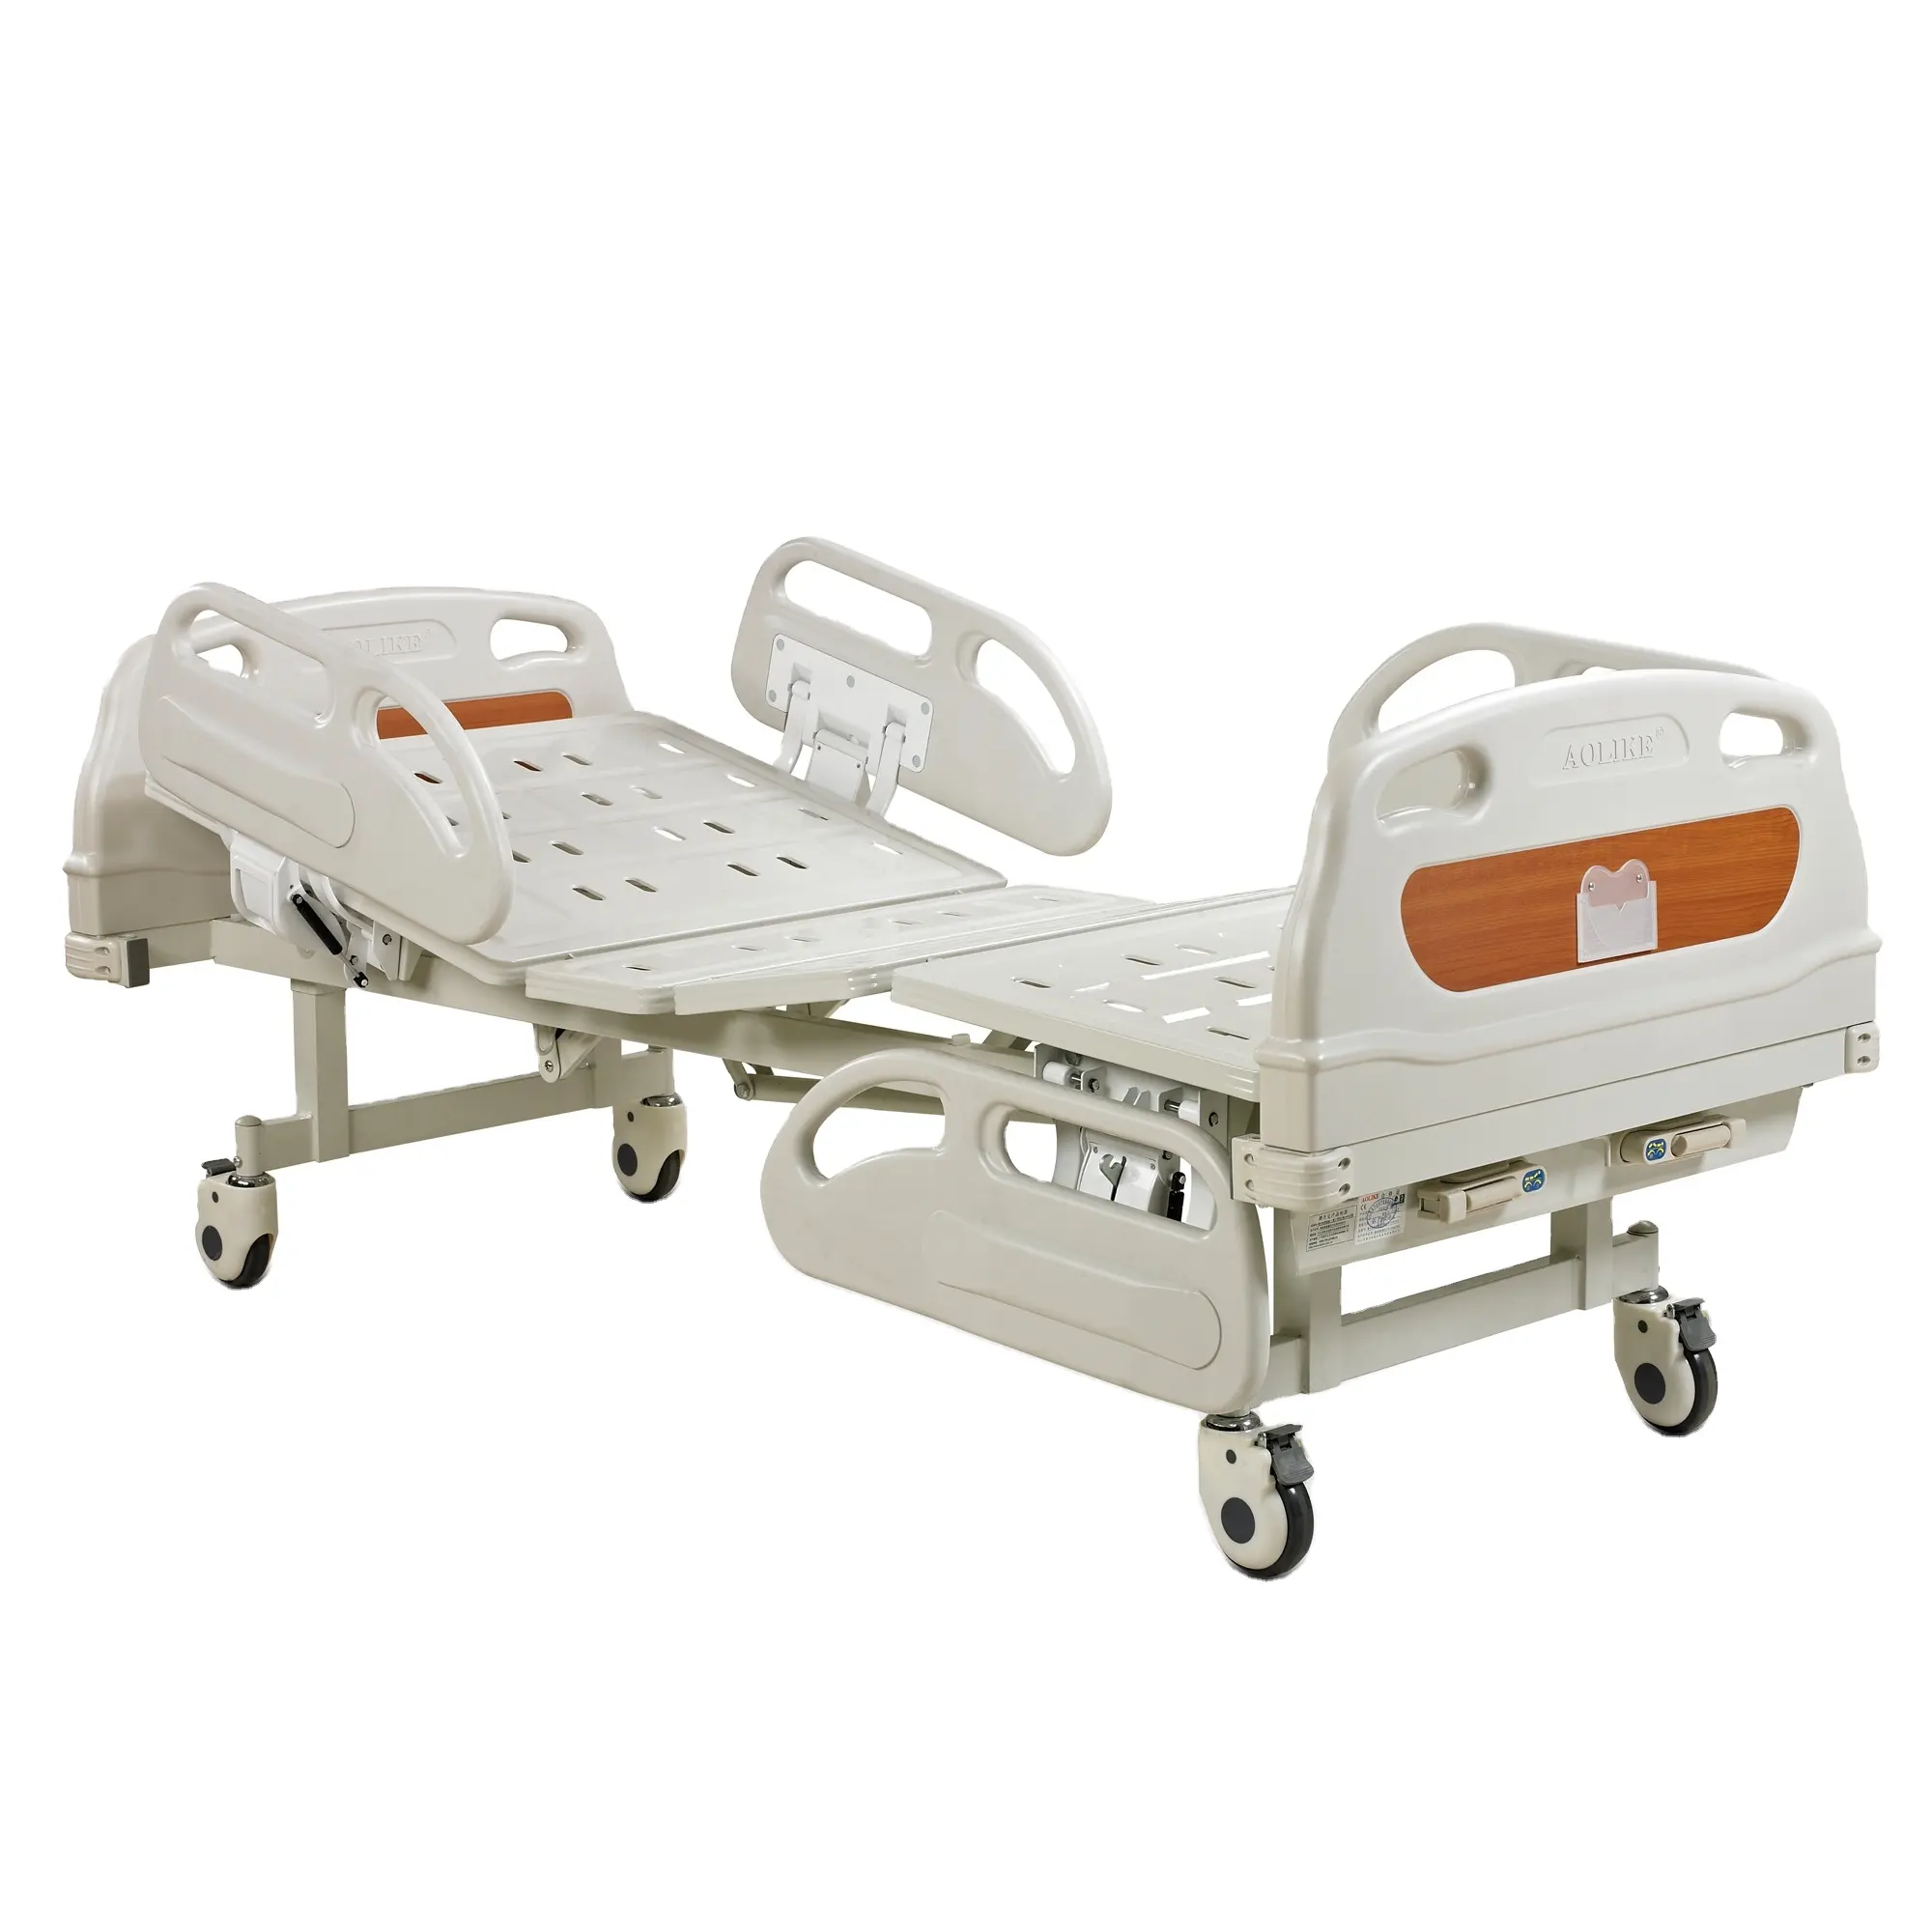 Hot sale steel CE certificated 2 crank deluxe medical manual hospital beds for hospital